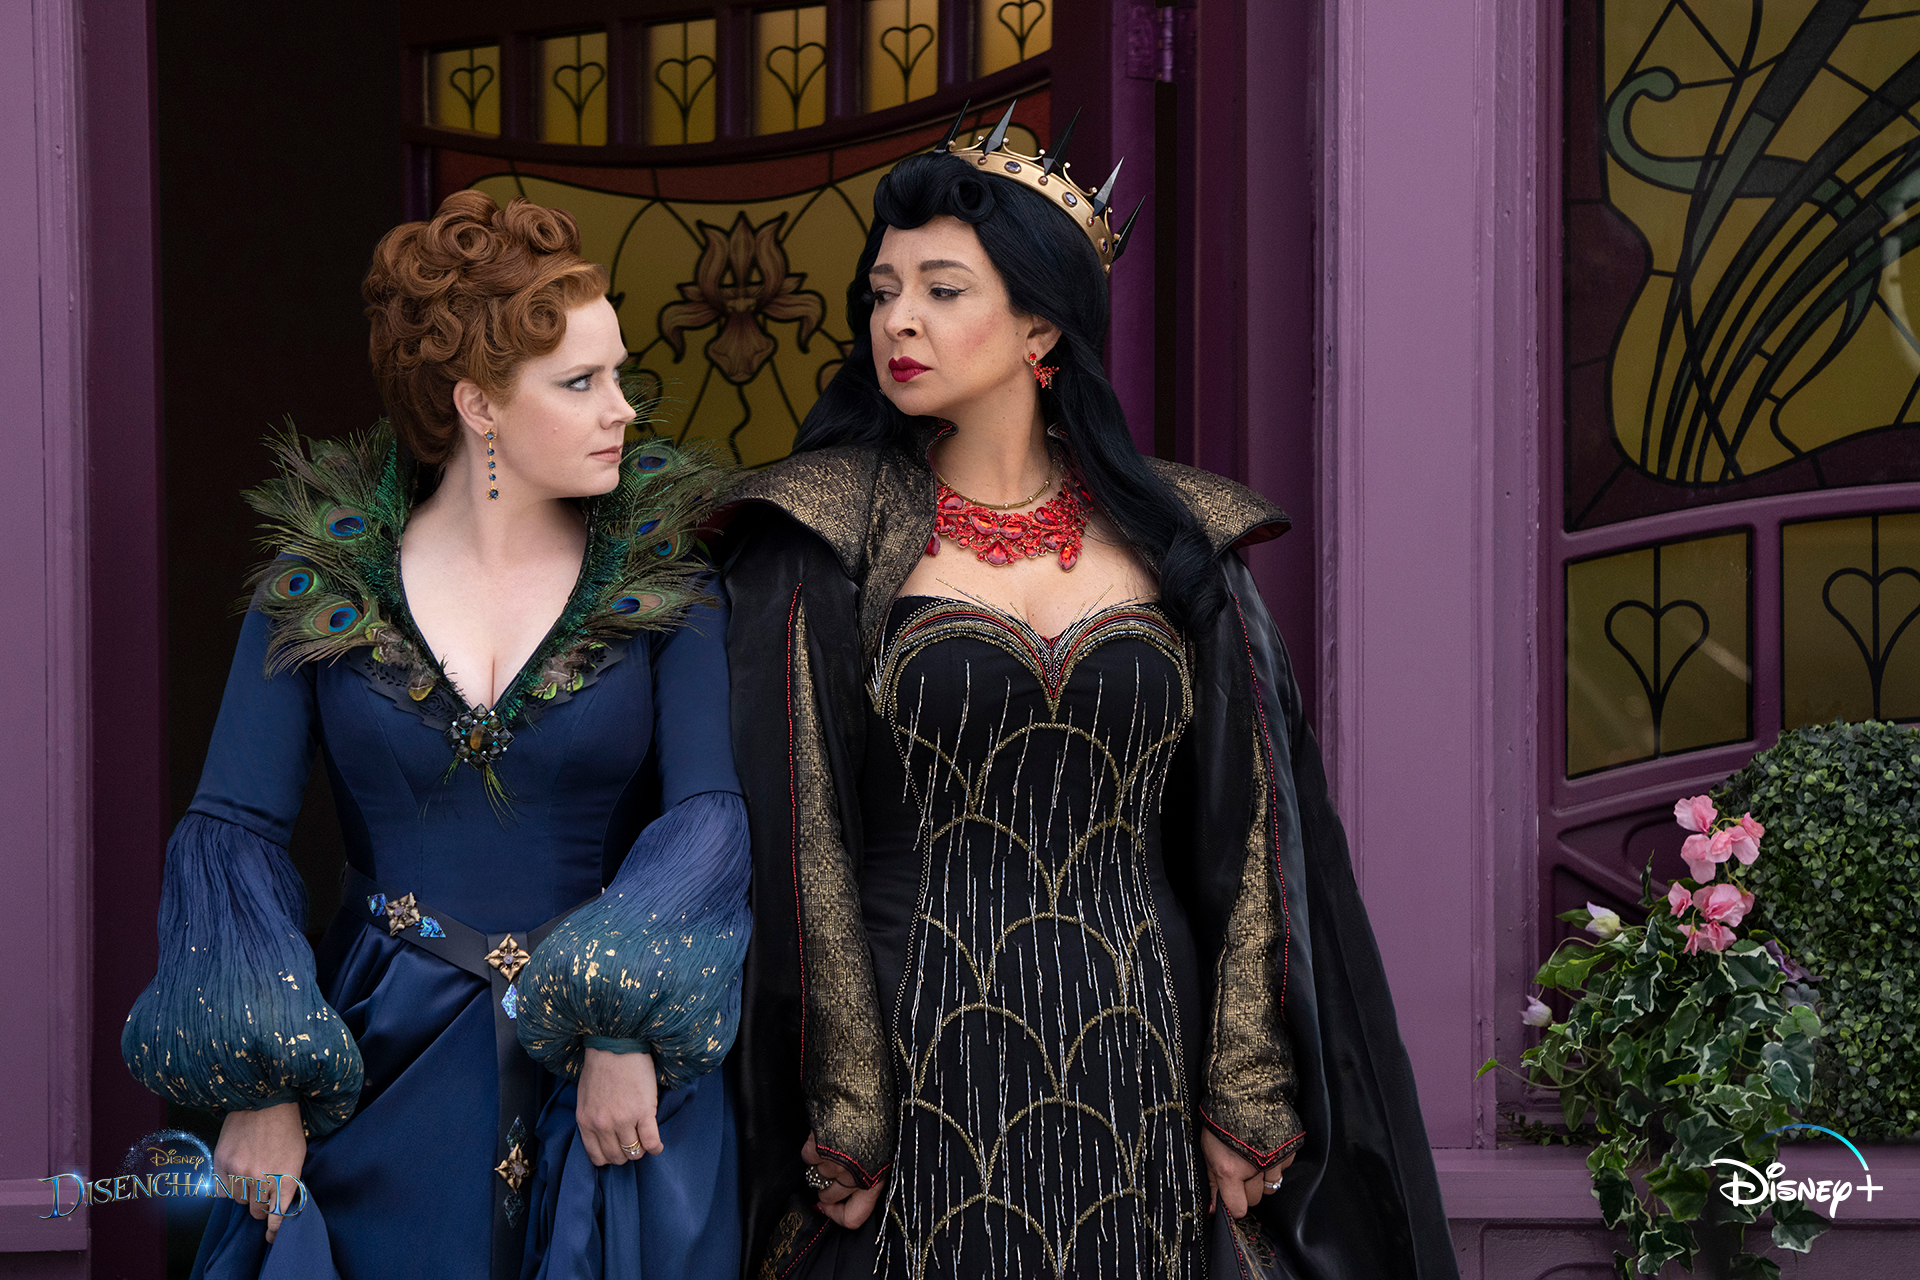 ‘Disenchanted’ Confirmed To Hit Disney+ This Year, First Official Look Released